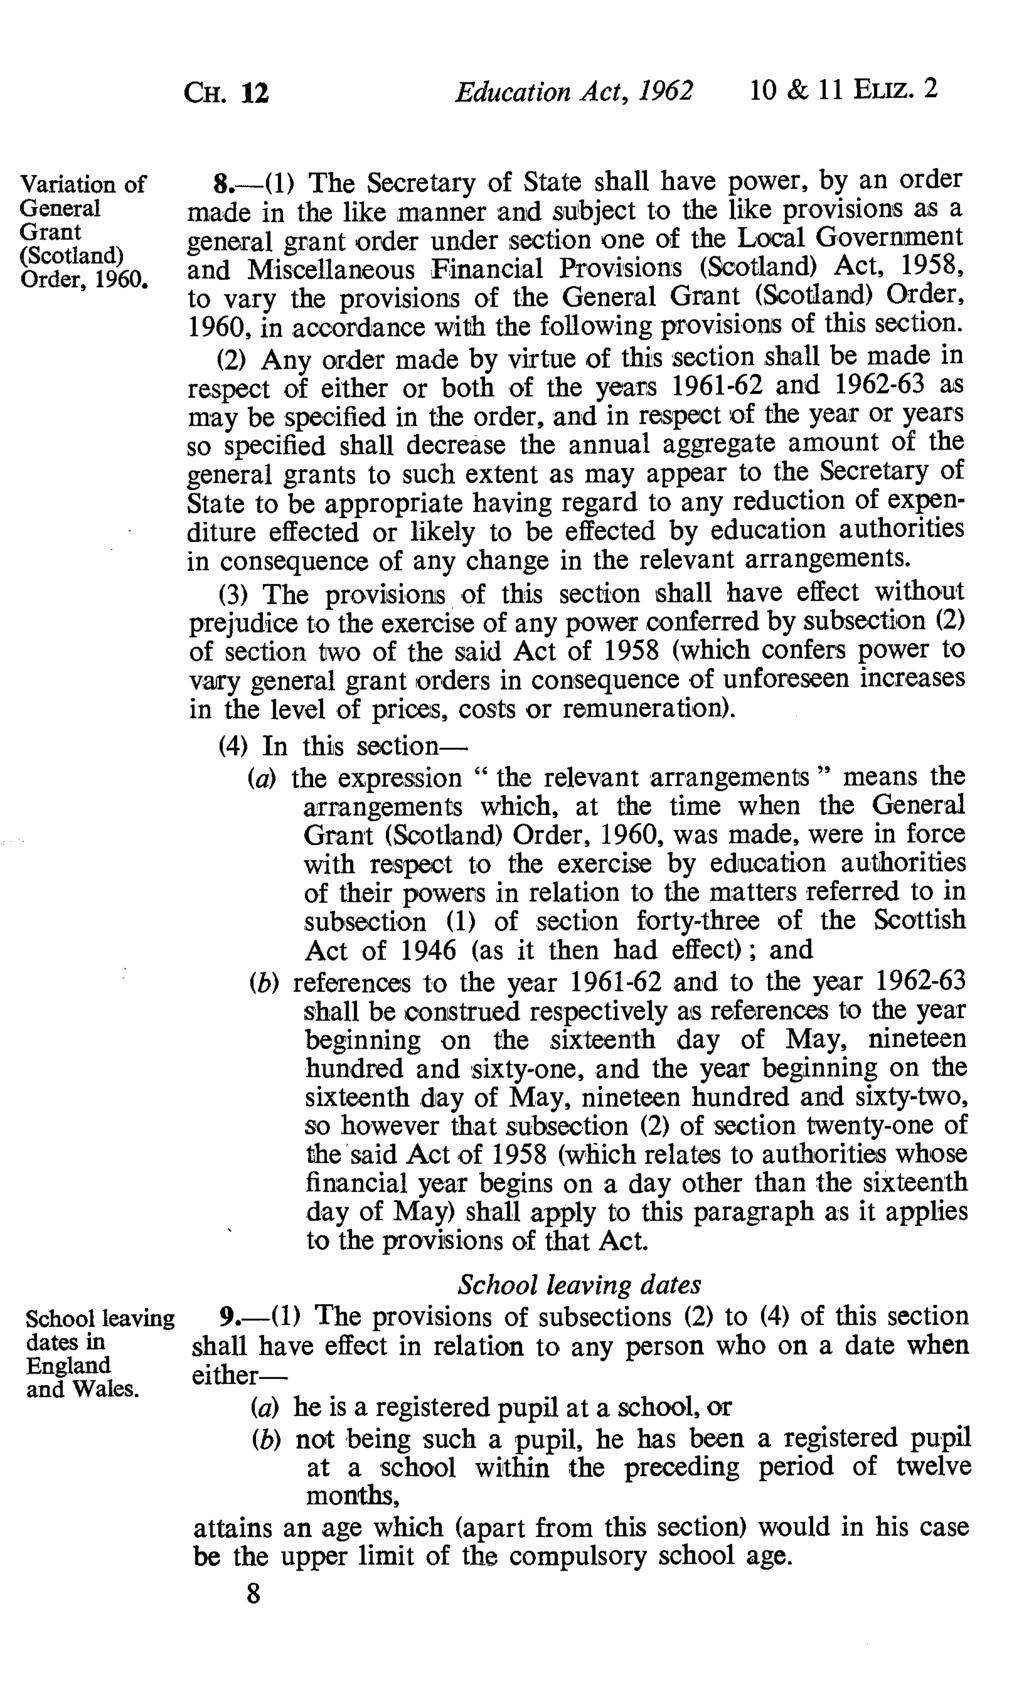 CH. 12 Education Act, 1962 10 & 11 ELIZ. 2 Variation of General Grant (Scotland) Order, 1960. School leaving dates in England and Wales. 8.